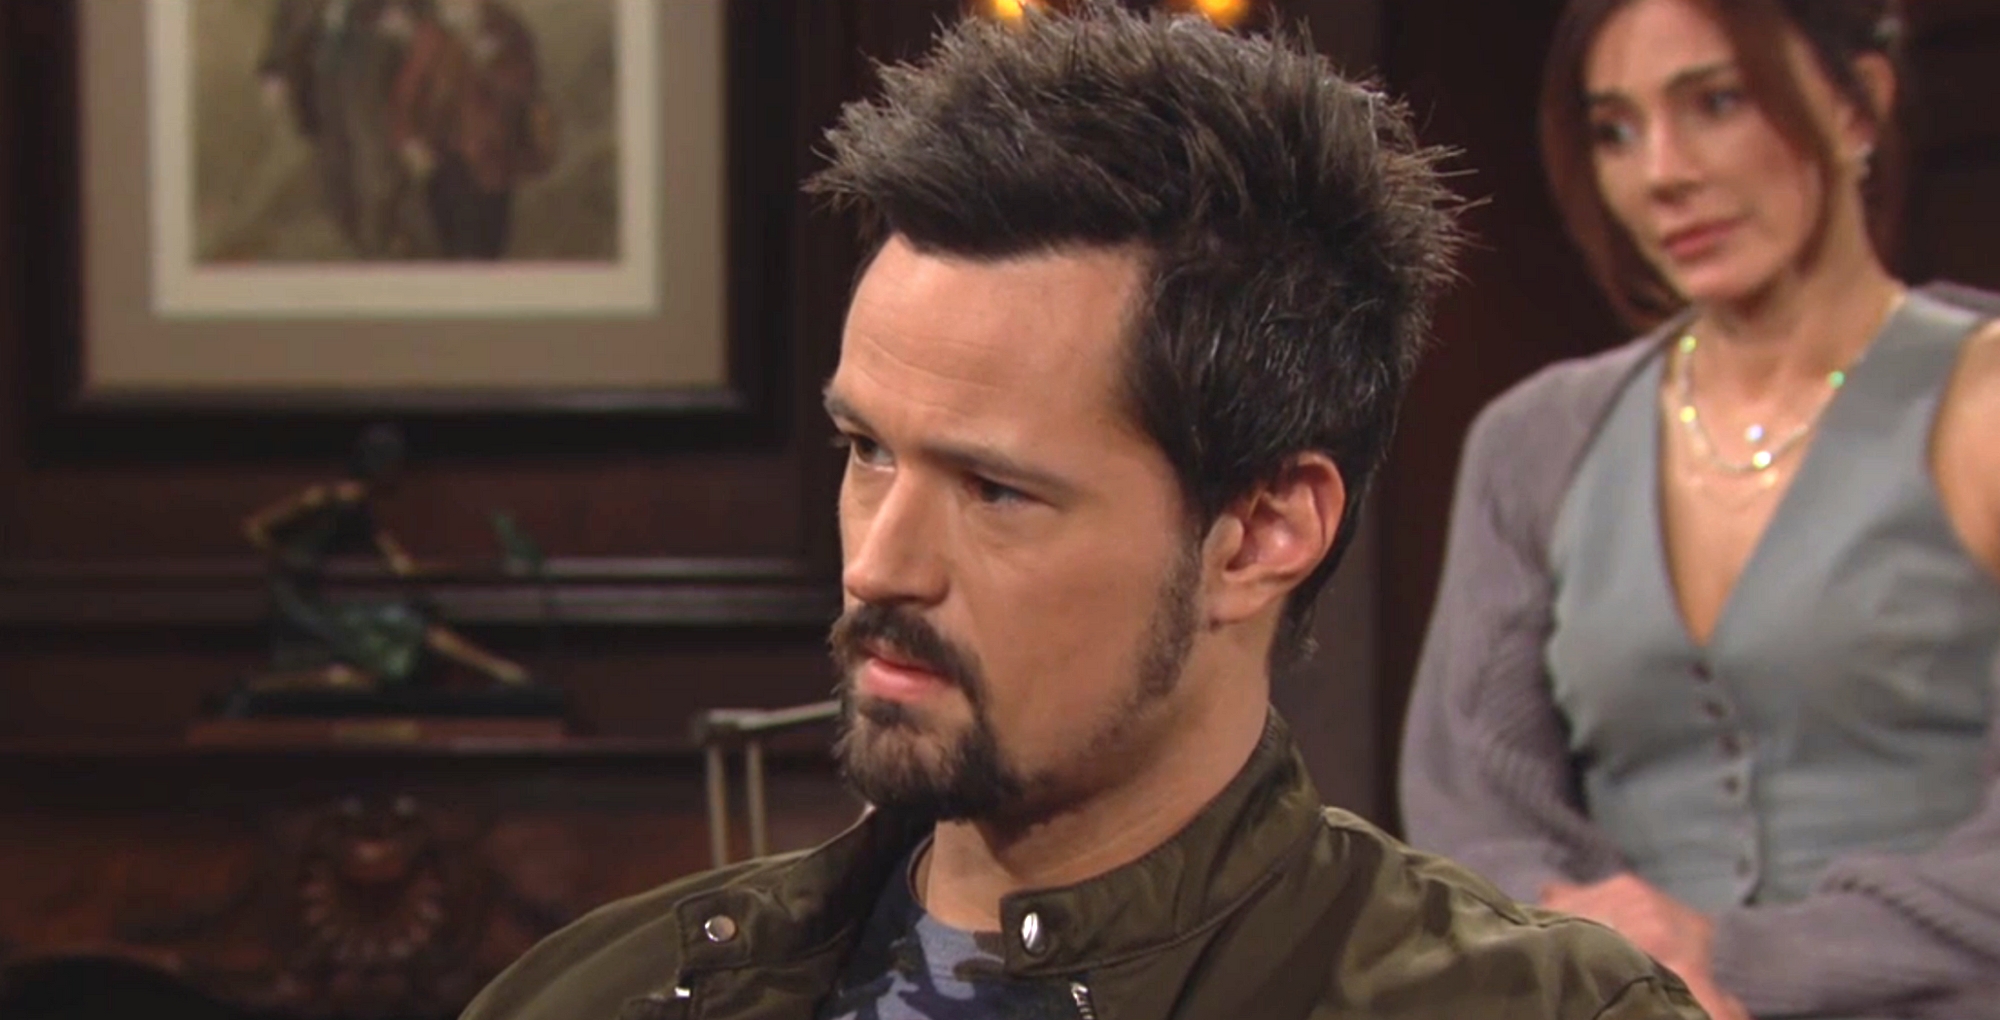 the bold and the beautiful recap for tuesday, march 7, 2023, taylor oversees thomas forrester's apology to brooke